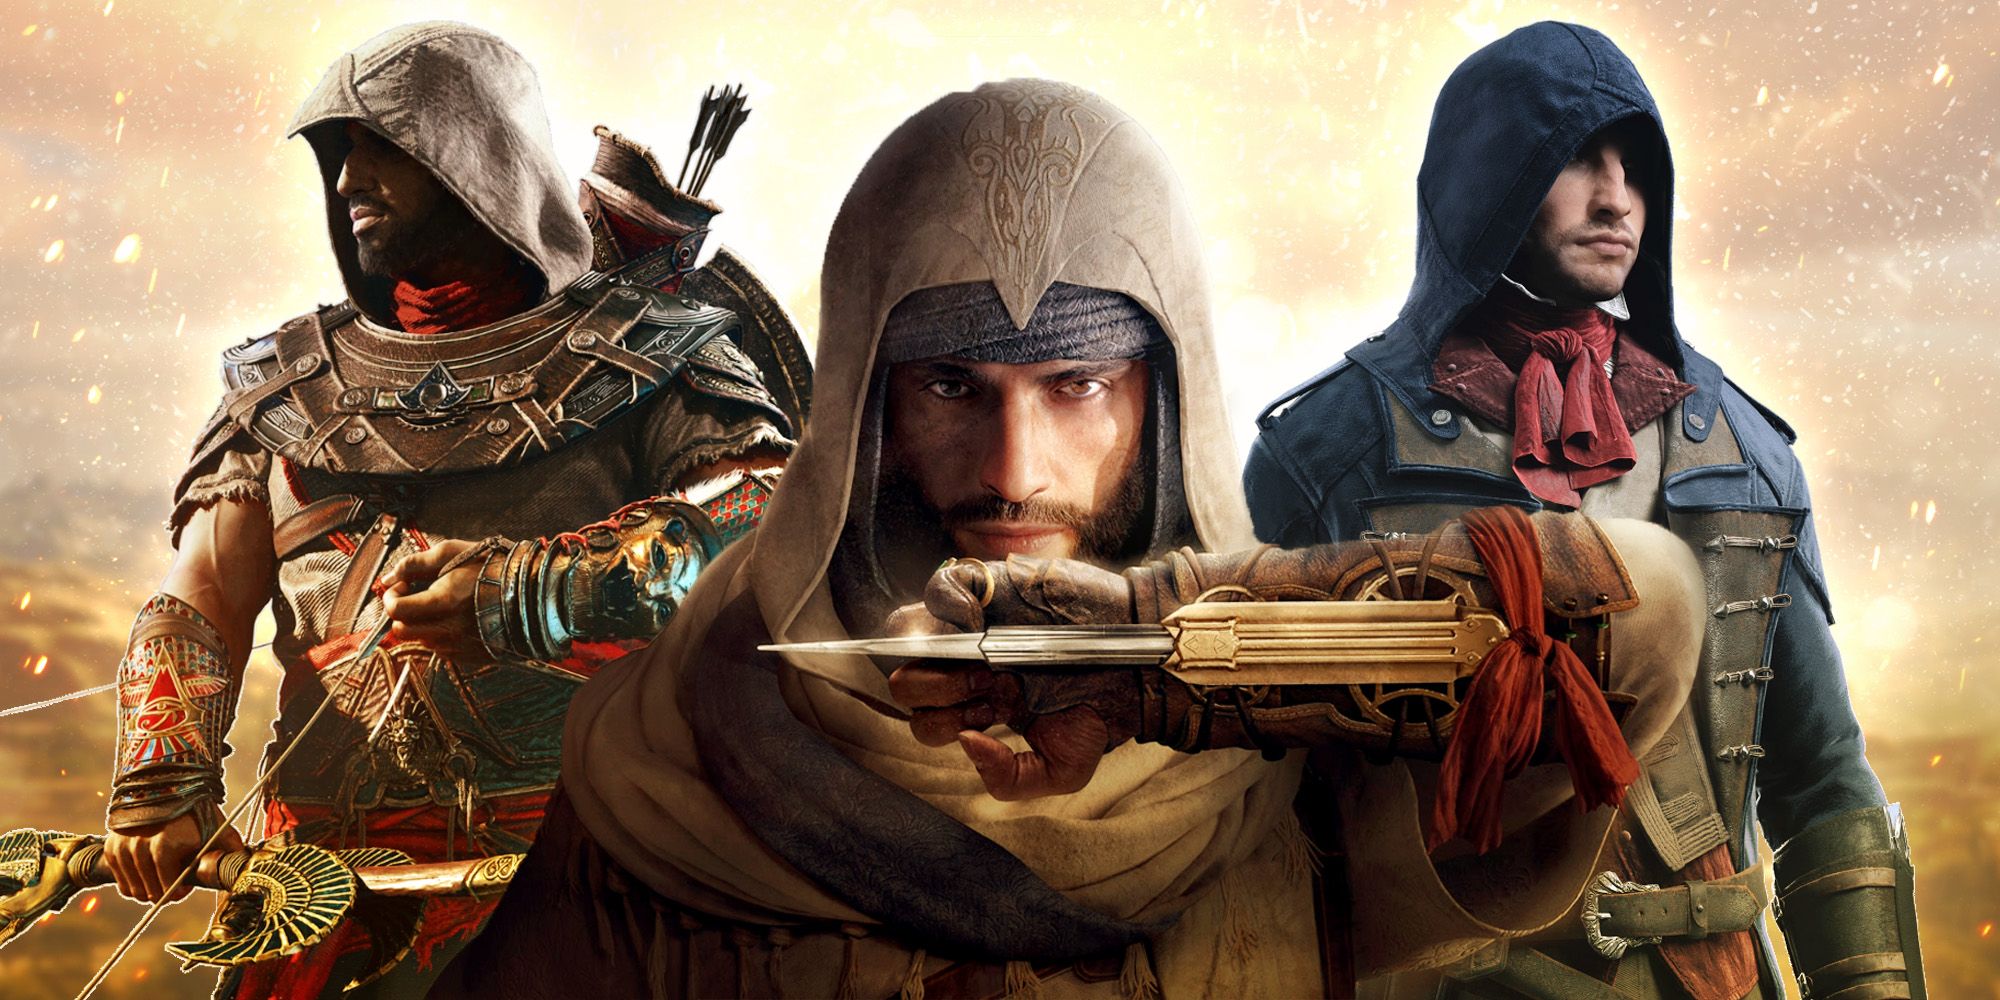 Assassin's Creed Mirage protagonist Basim in front of assassins Bayek and Arno.